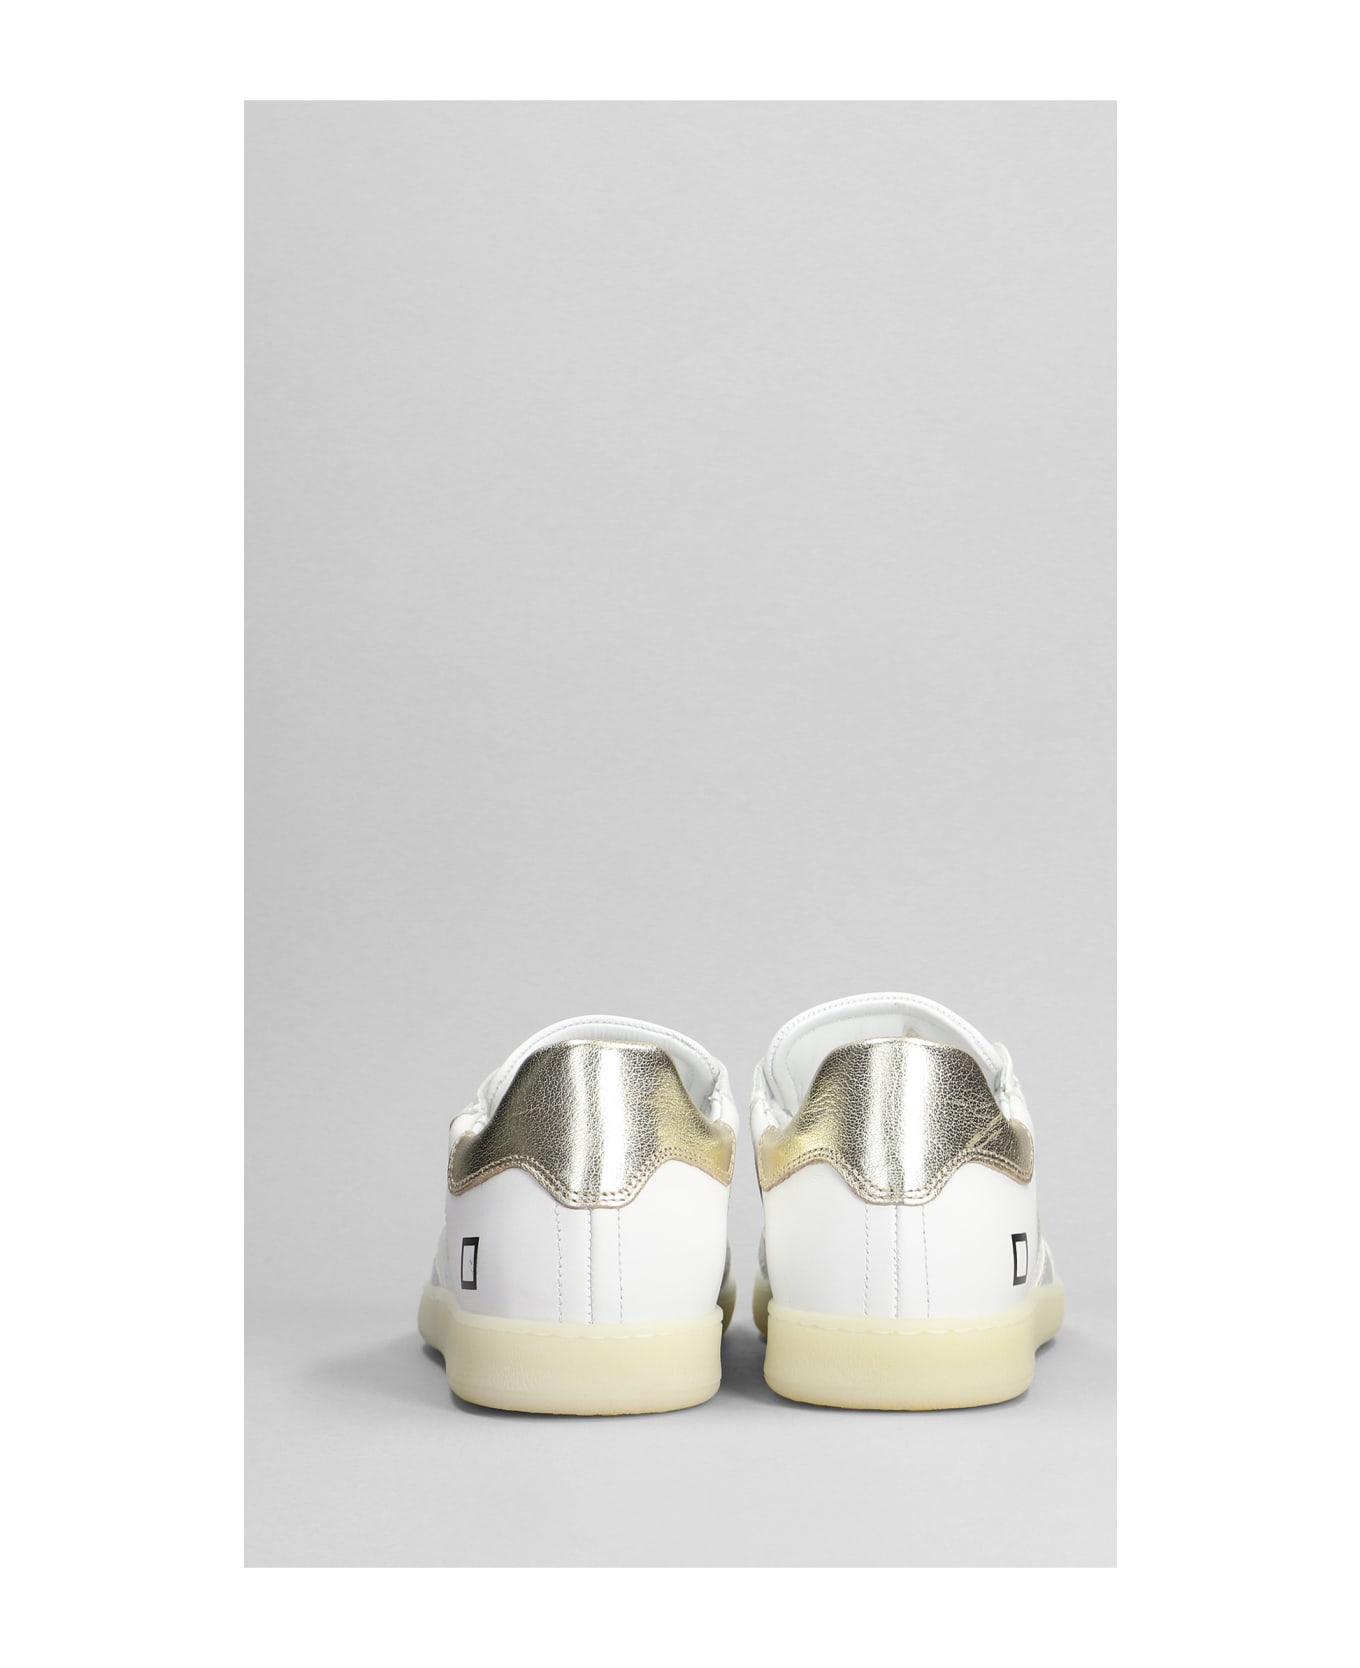 D.A.T.E. Sportylow Sneakers In White Leather - white